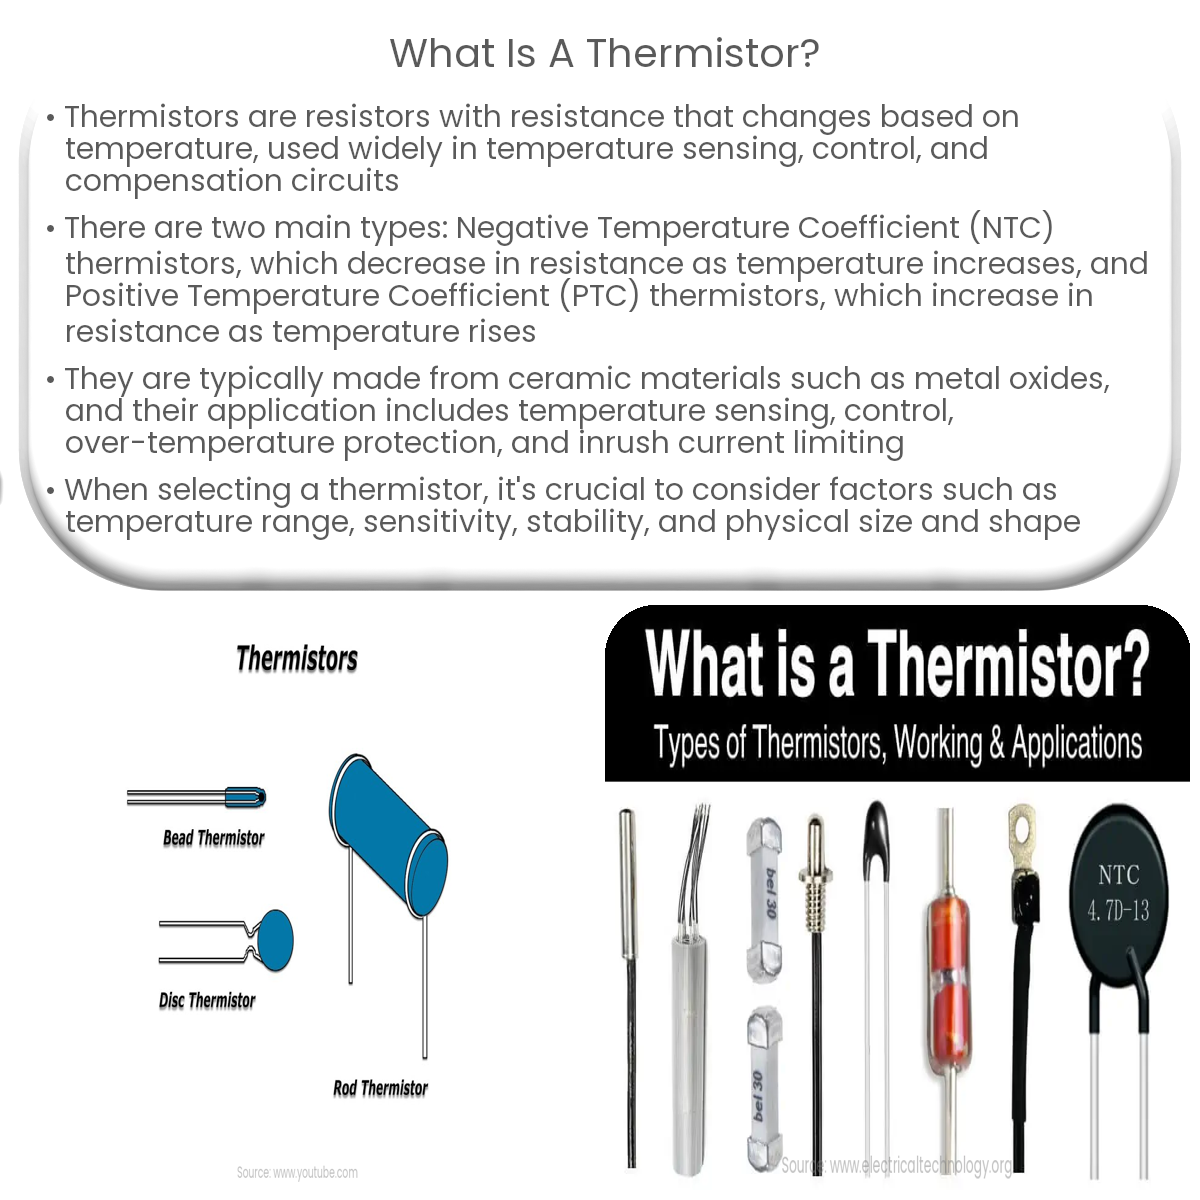 What is a thermistor?